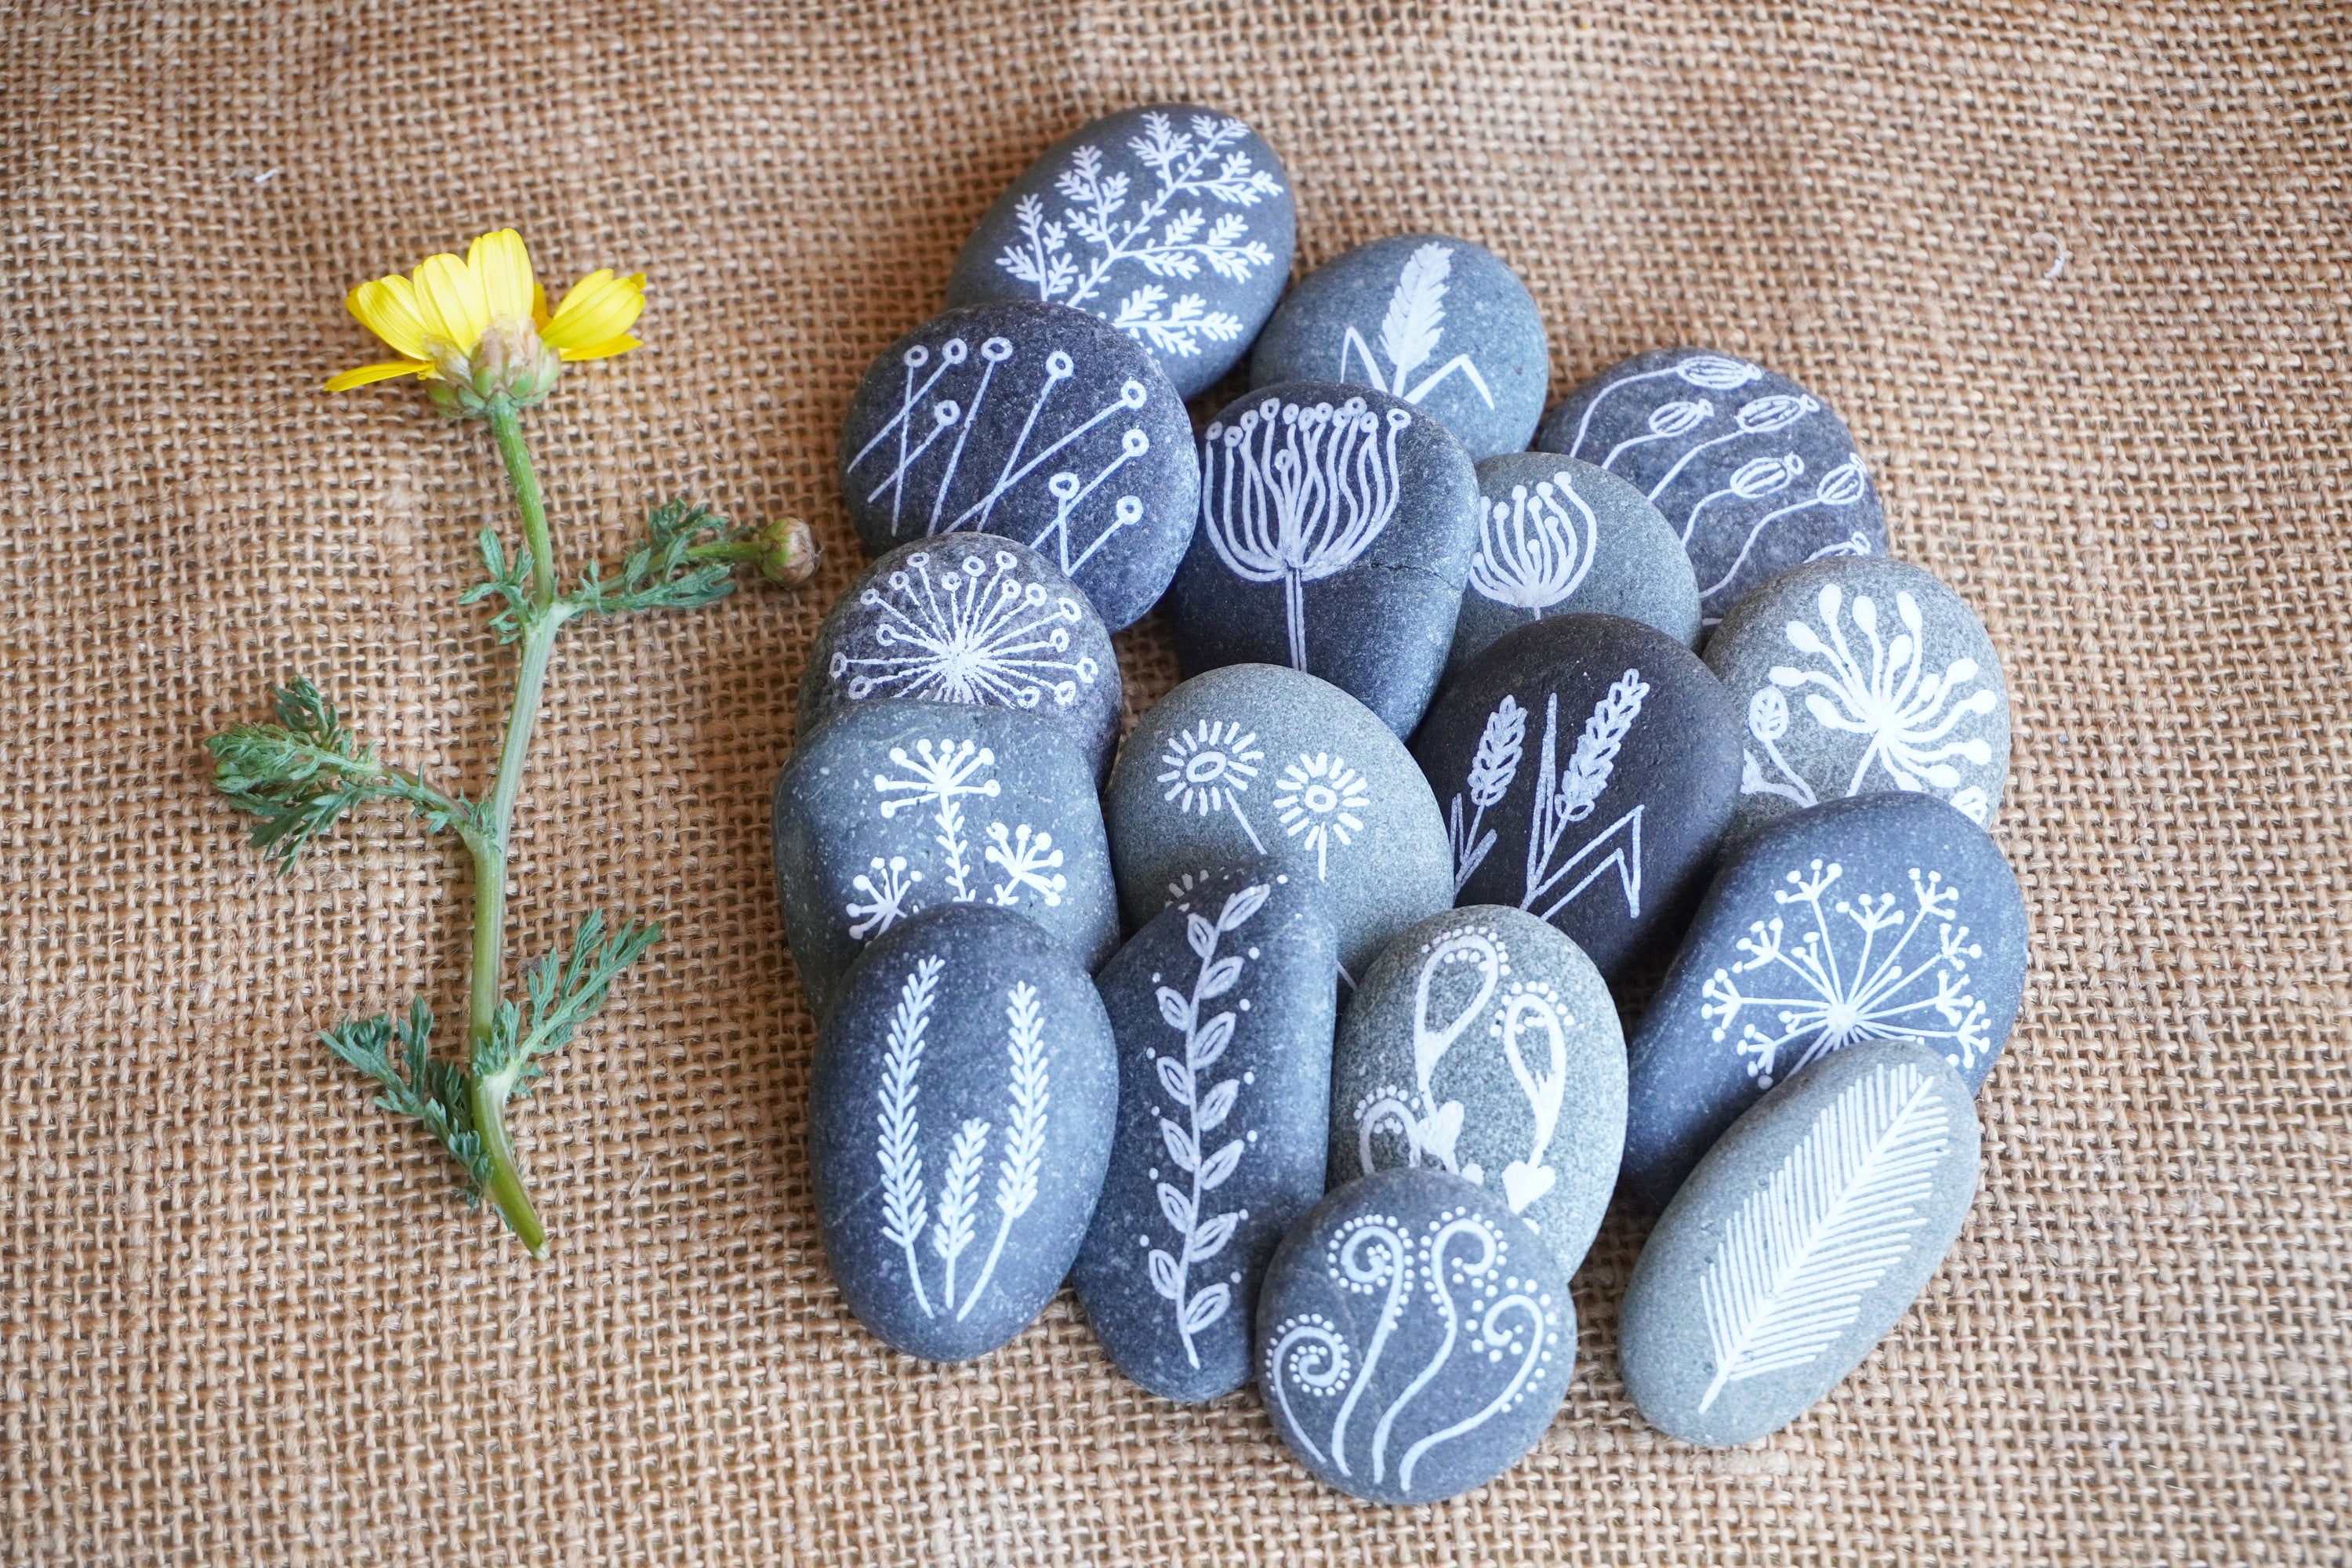 Painted Stones Sea Pebbles With Nature Designs, White Black